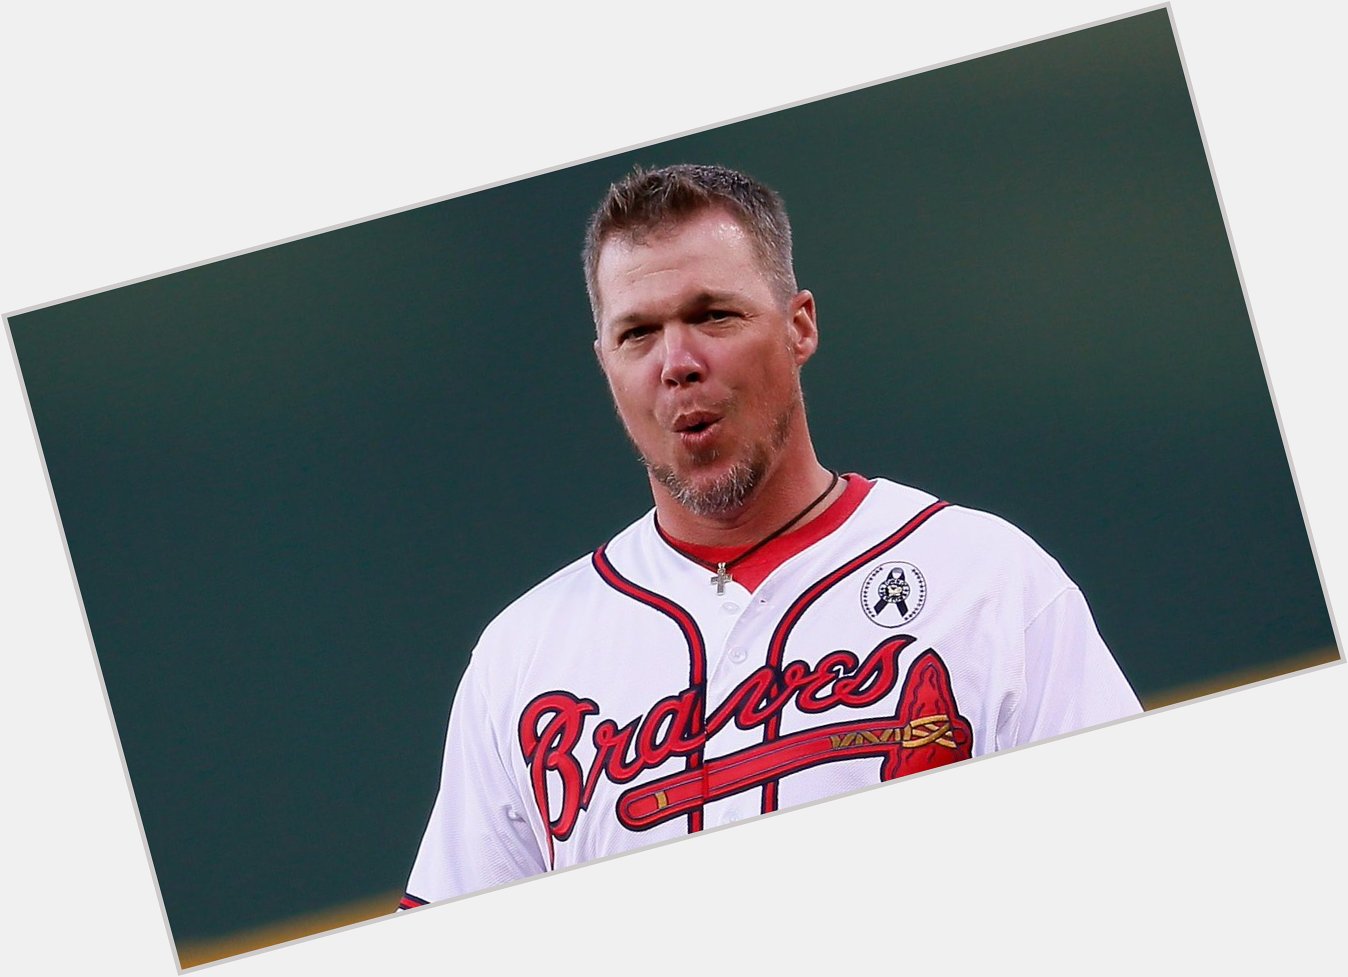 Happy 50th Birthday to Hall of Famer, Chipper Jones, born this day in Deland, FL. 